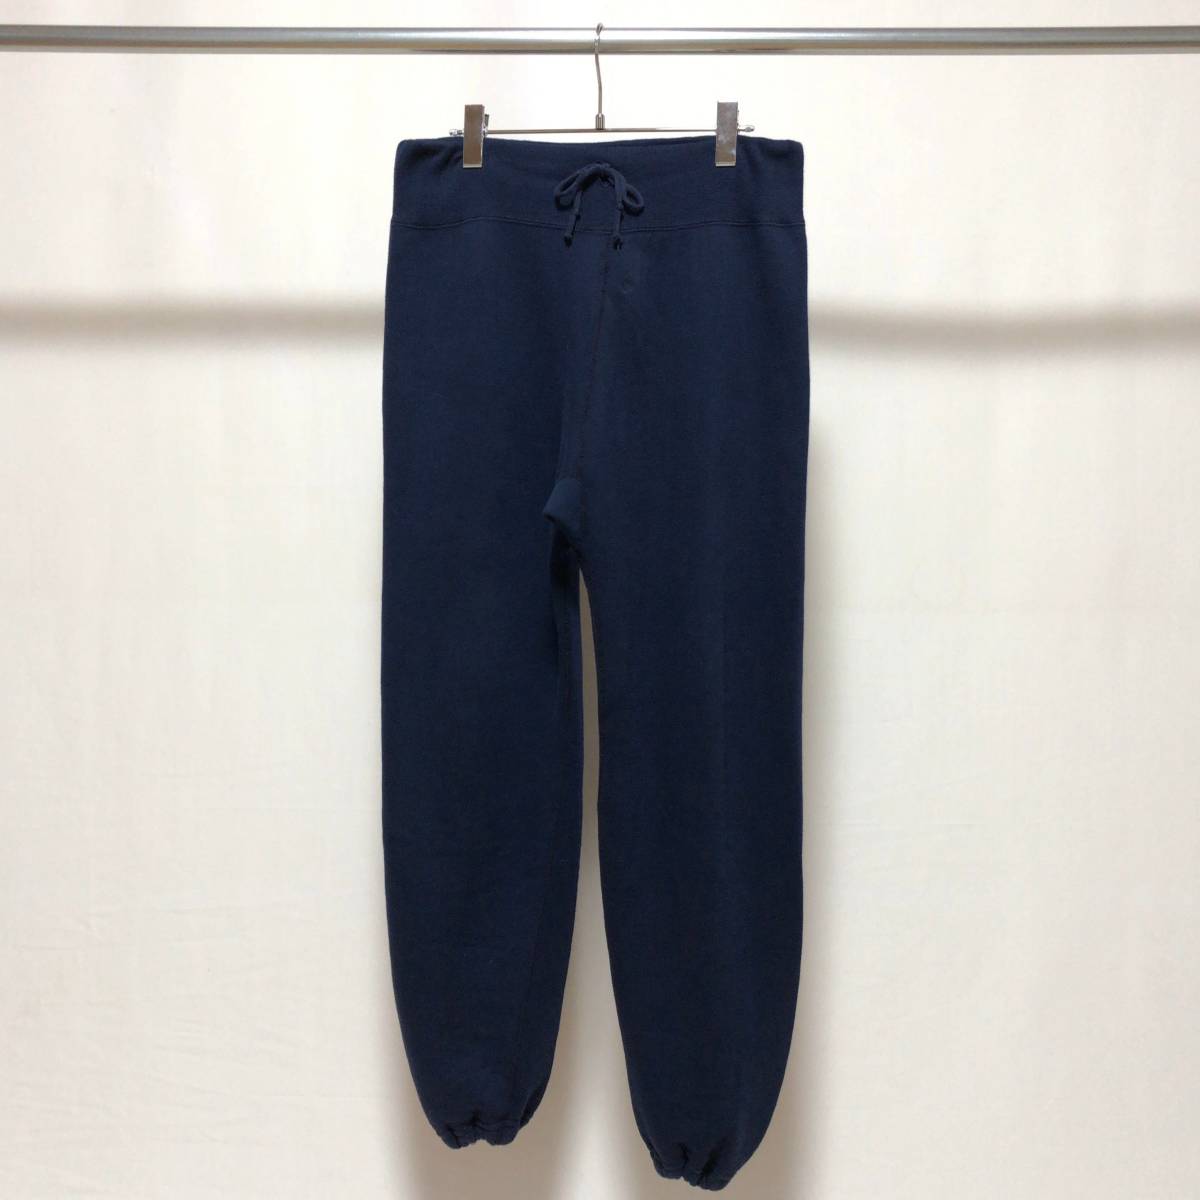 Southern Athletic / 60-70's Vintage Sweat Pants / Made in USA (also) /サウザンアスレティック/ヴィンテージスウェット/アメリカ製